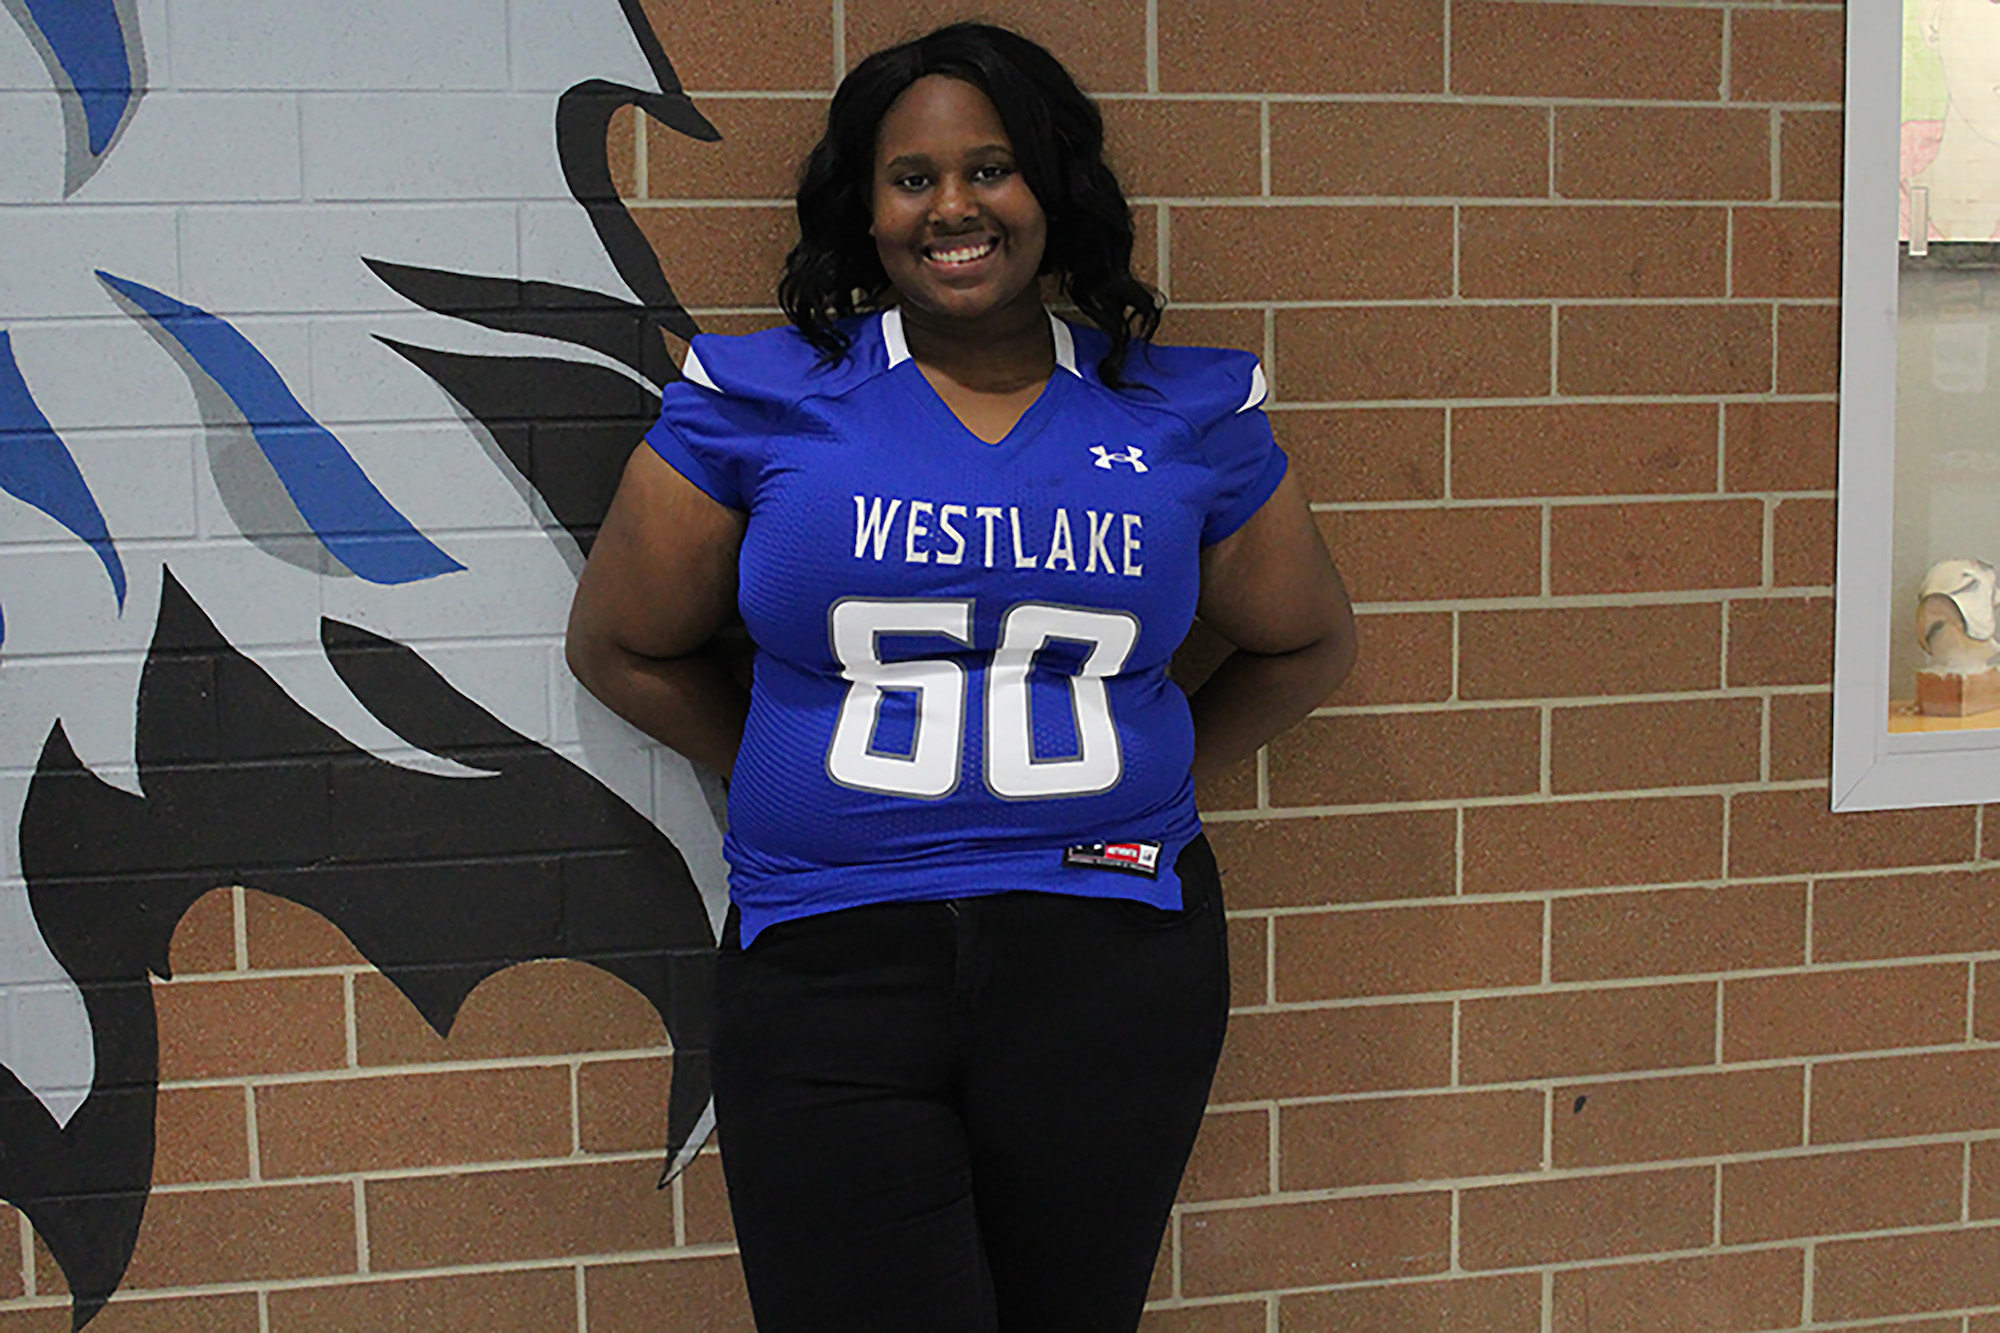 Westlake’s Alston Becomes First Female Varsity Football Player to Score